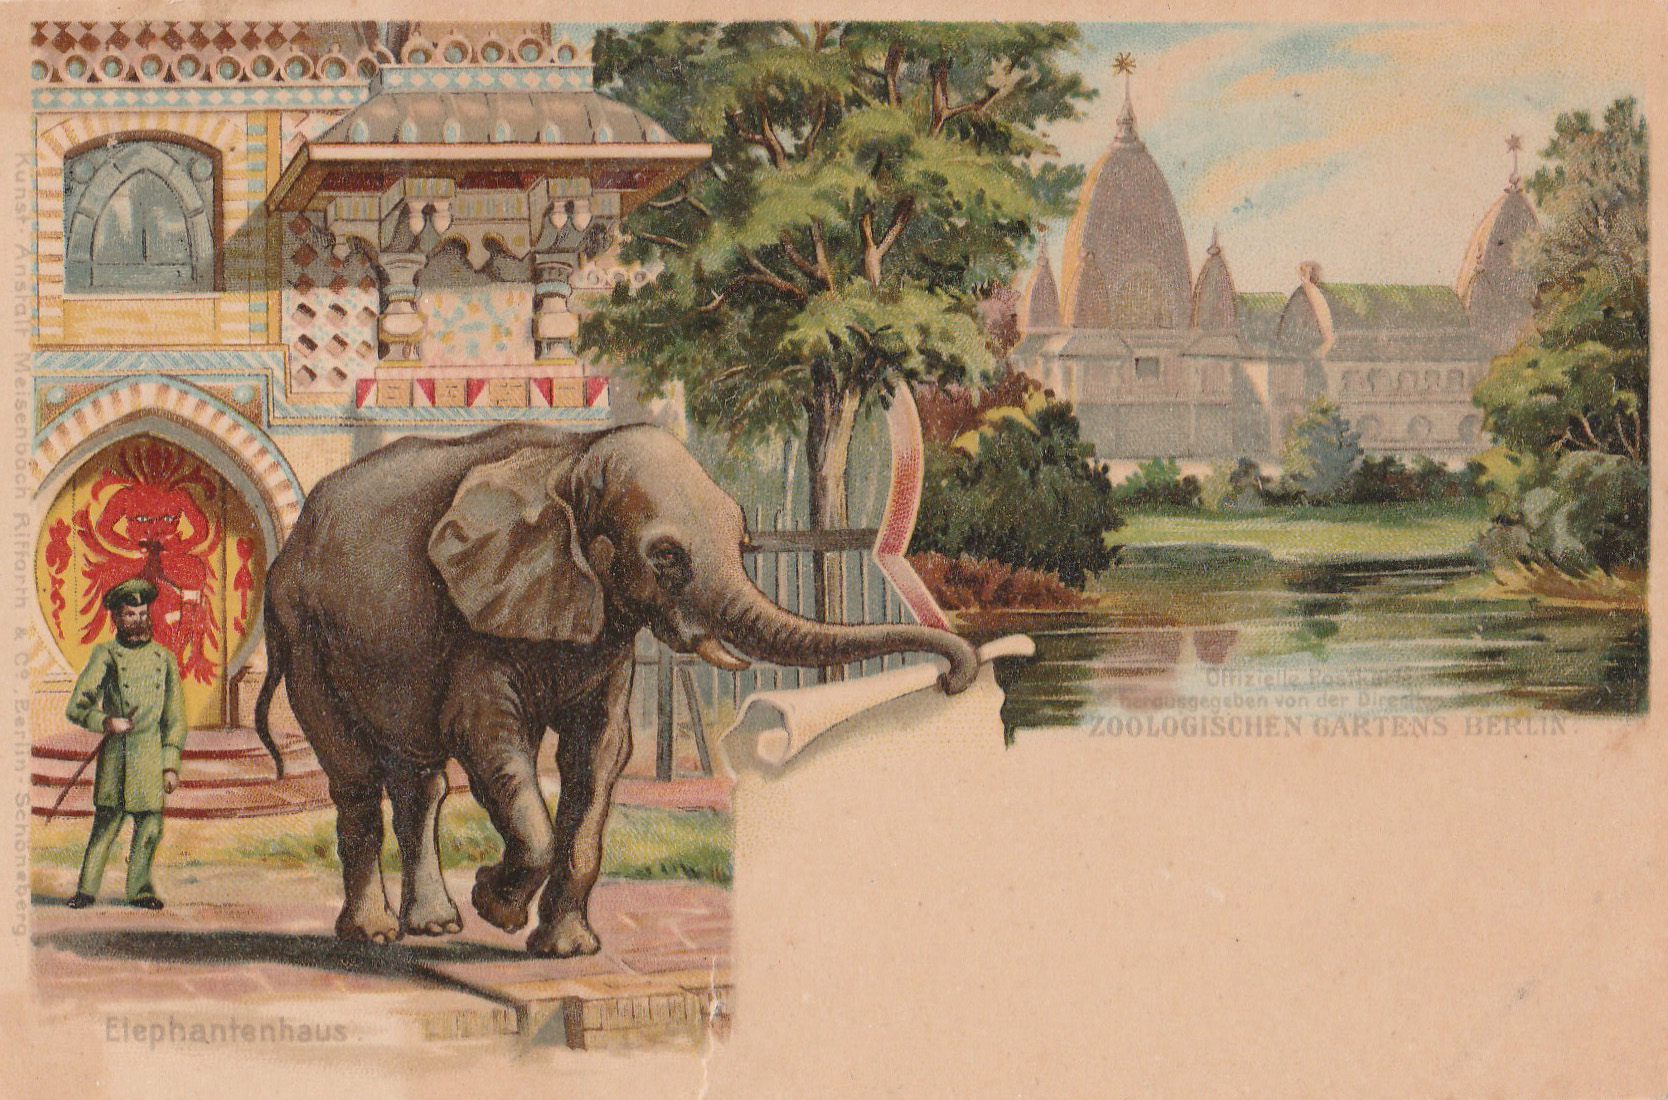 Colourful drawing: an elephant seems to rip the drawing off a postcard and roll it up with its trunk, leaving the bottom right-hand corner empty. Behind the elephant on the left is a colourful, Orientalist-looking structure; to the right behind the water and trees is a palace-like building with towers. A bearded zookeeper stands at the bottom left wearing a green uniform.